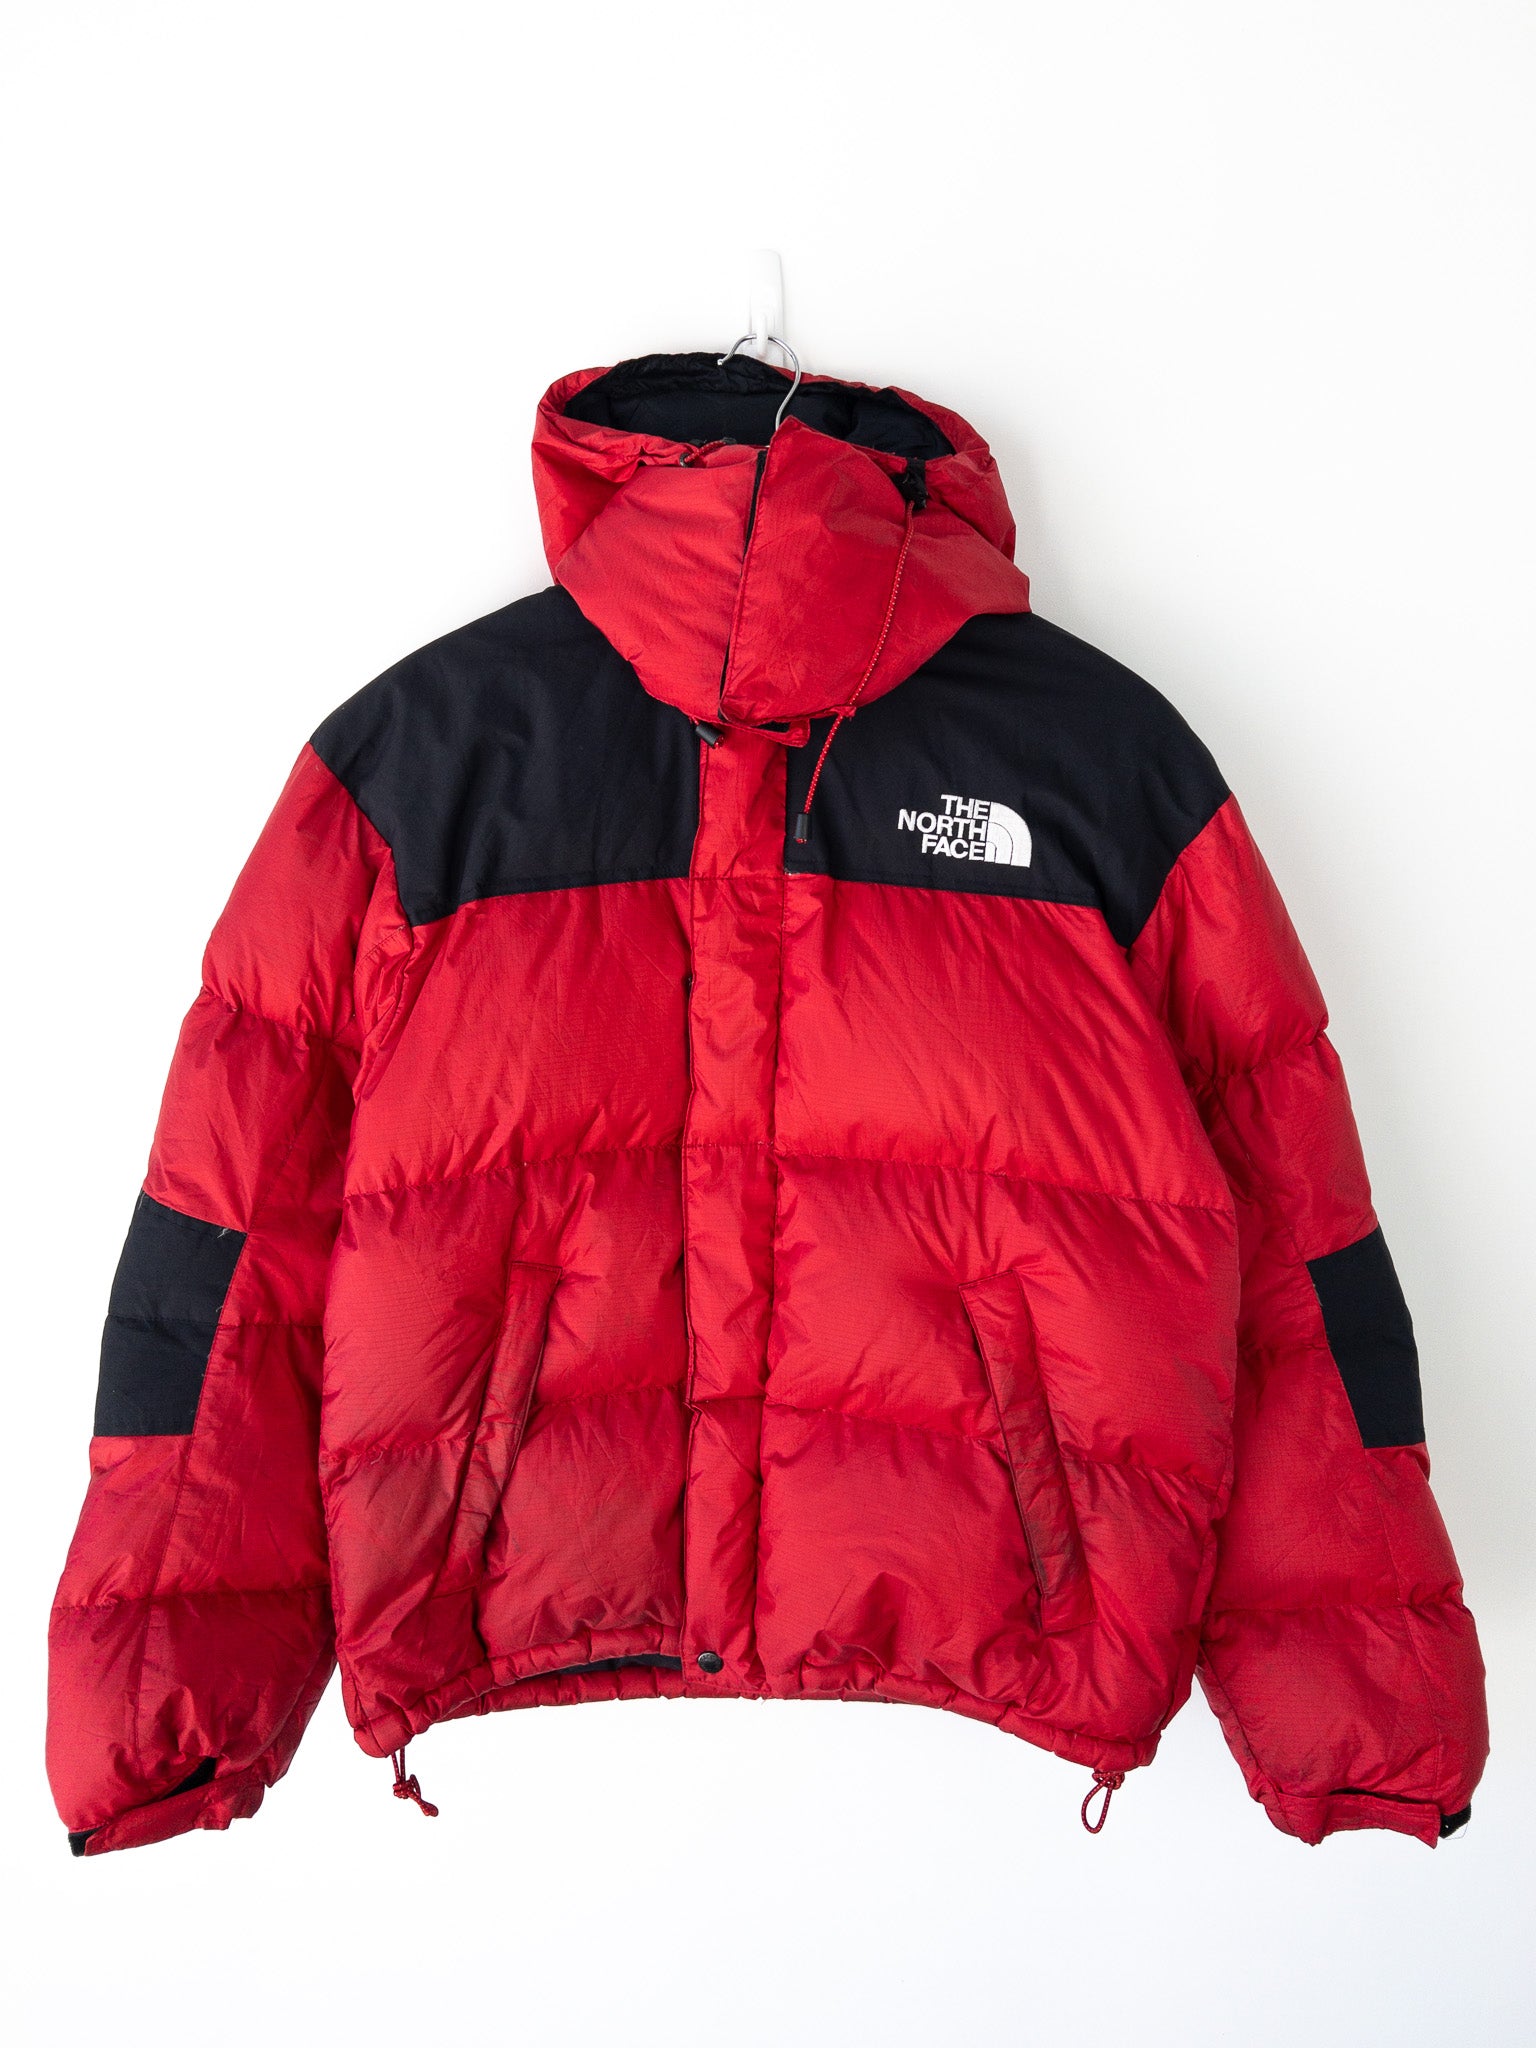 Vintage The North Face 700 Puffer Jacket (M)